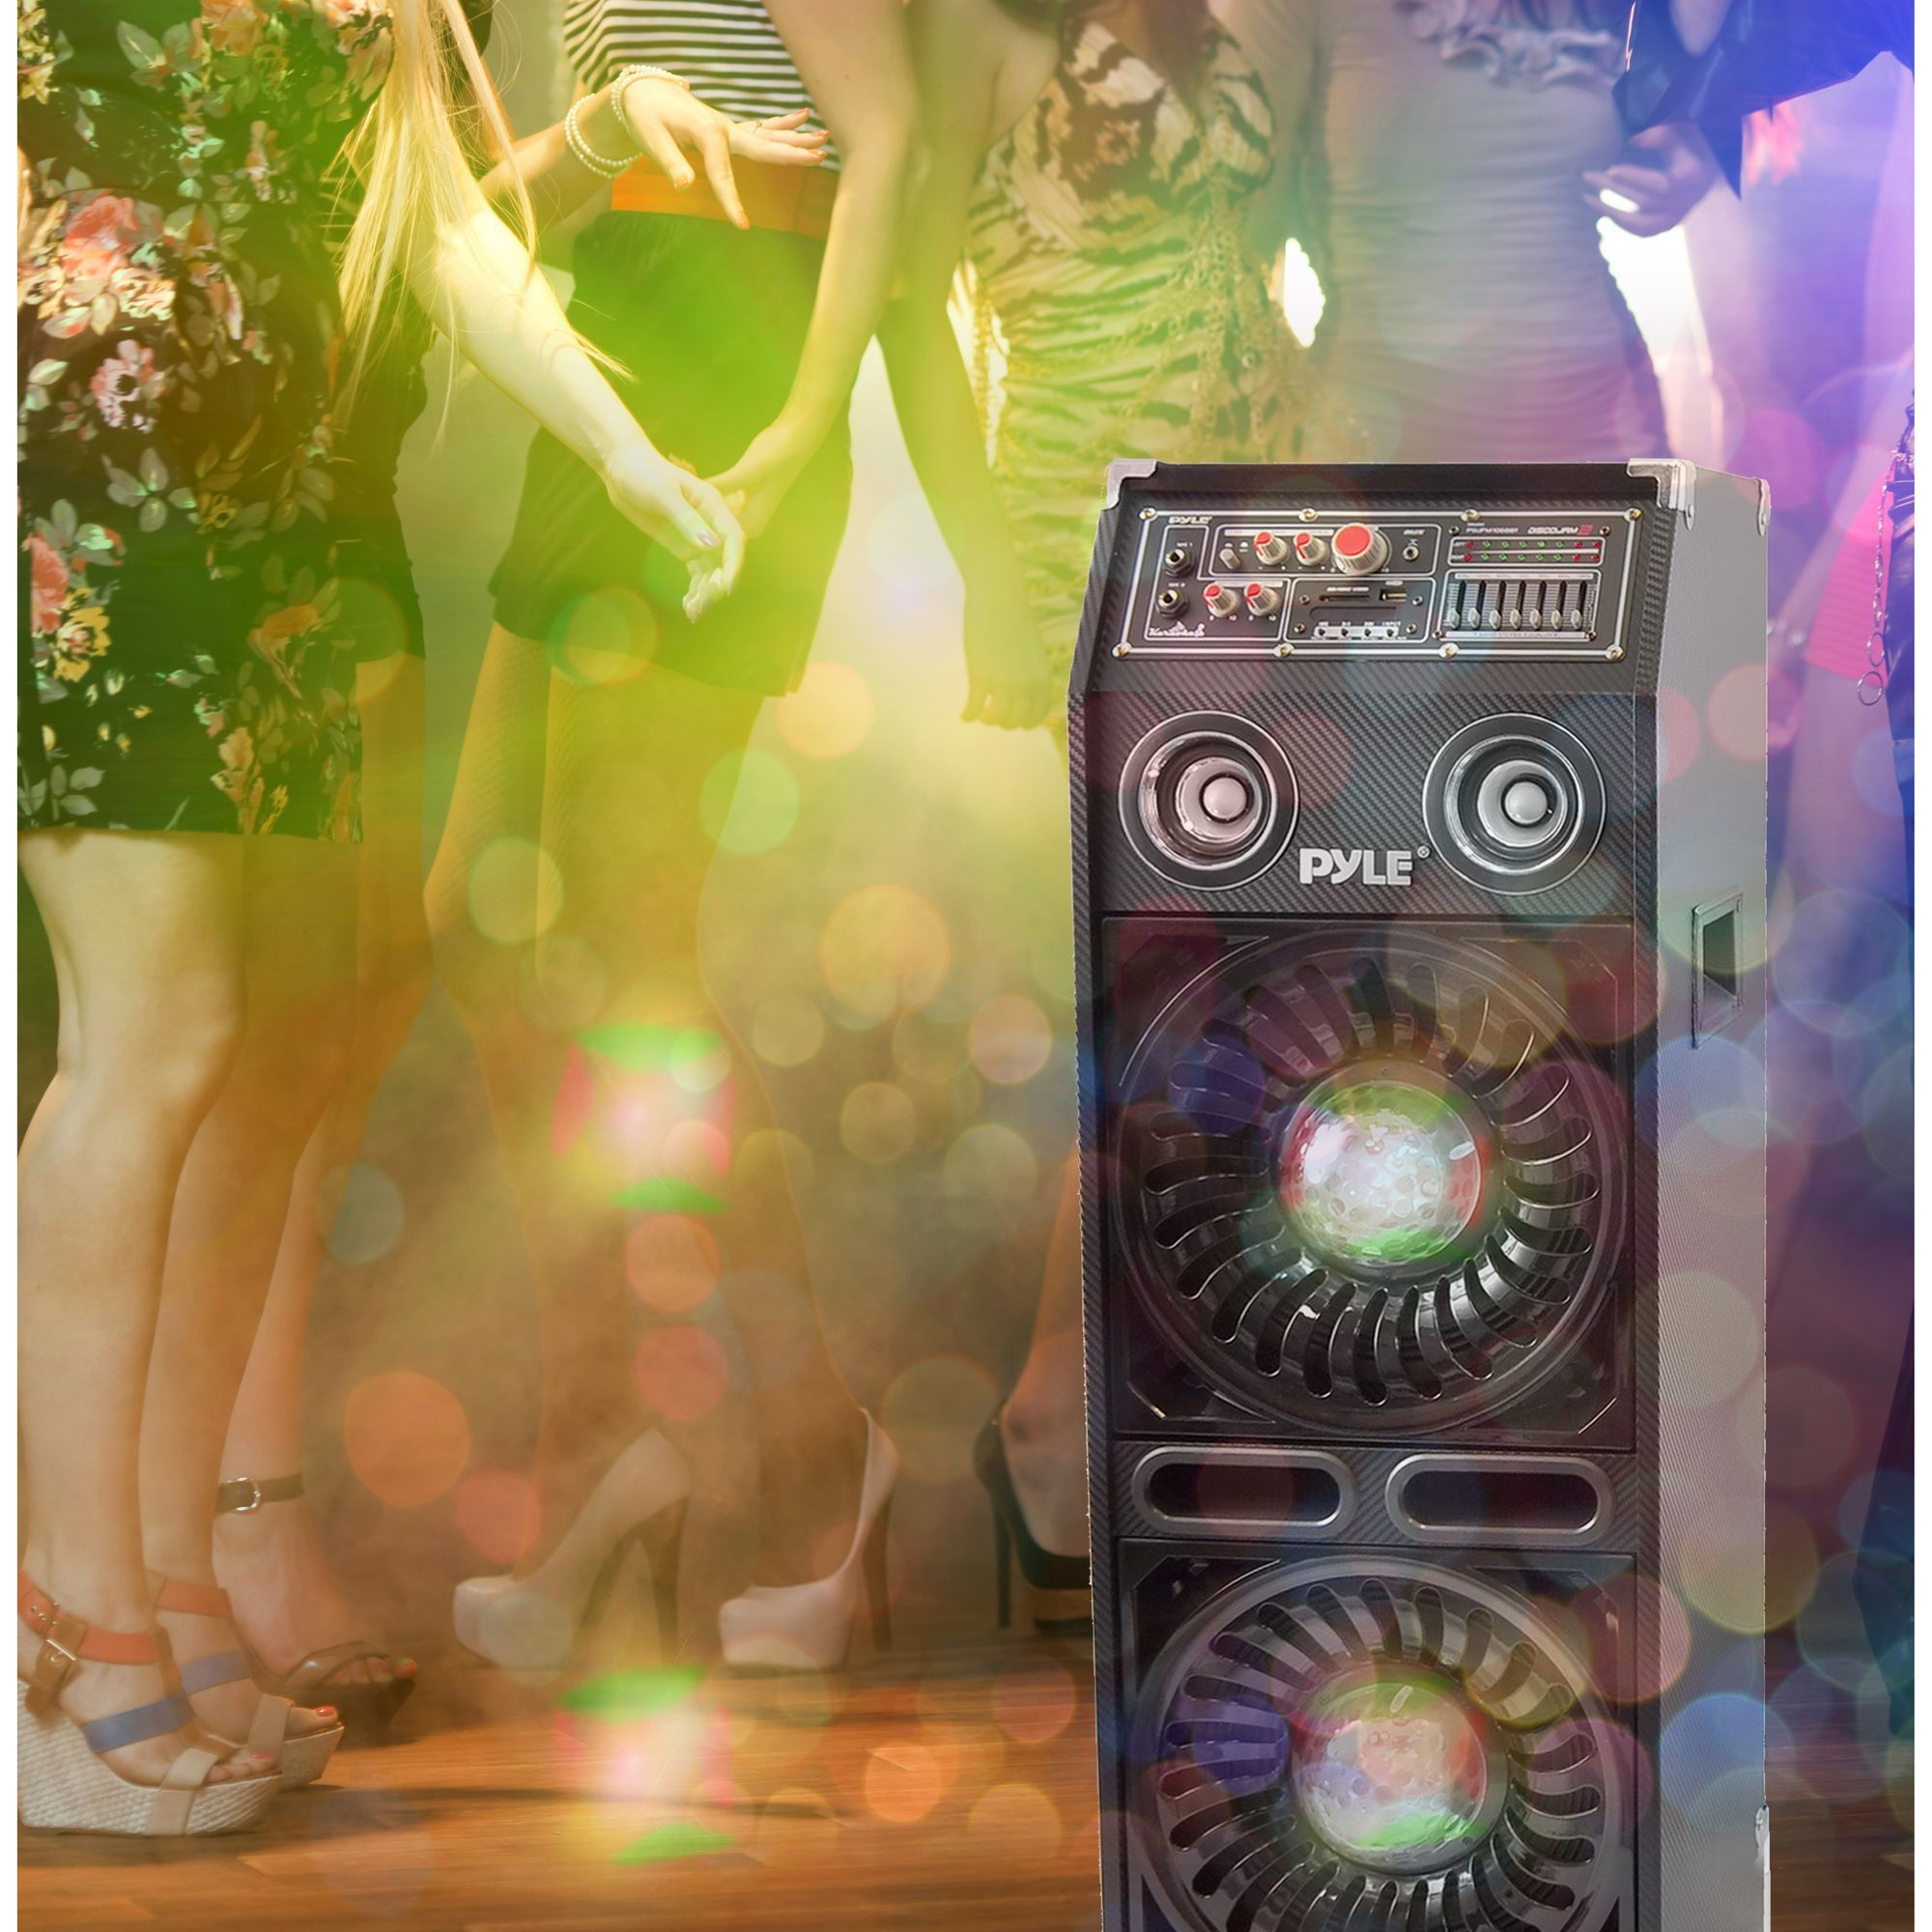 Disco Jam 2 Bluetooth Active Powered PA Speaker System, Flashing DJ Lights, Dual 10-Inch Woofers, Dual 3-Inch Tweeters, USB/SD Memory Card Readers, Aux (3.5mm) Input, 1200 Watt (Works with Passive Speaker Model: PSUFM1065P)